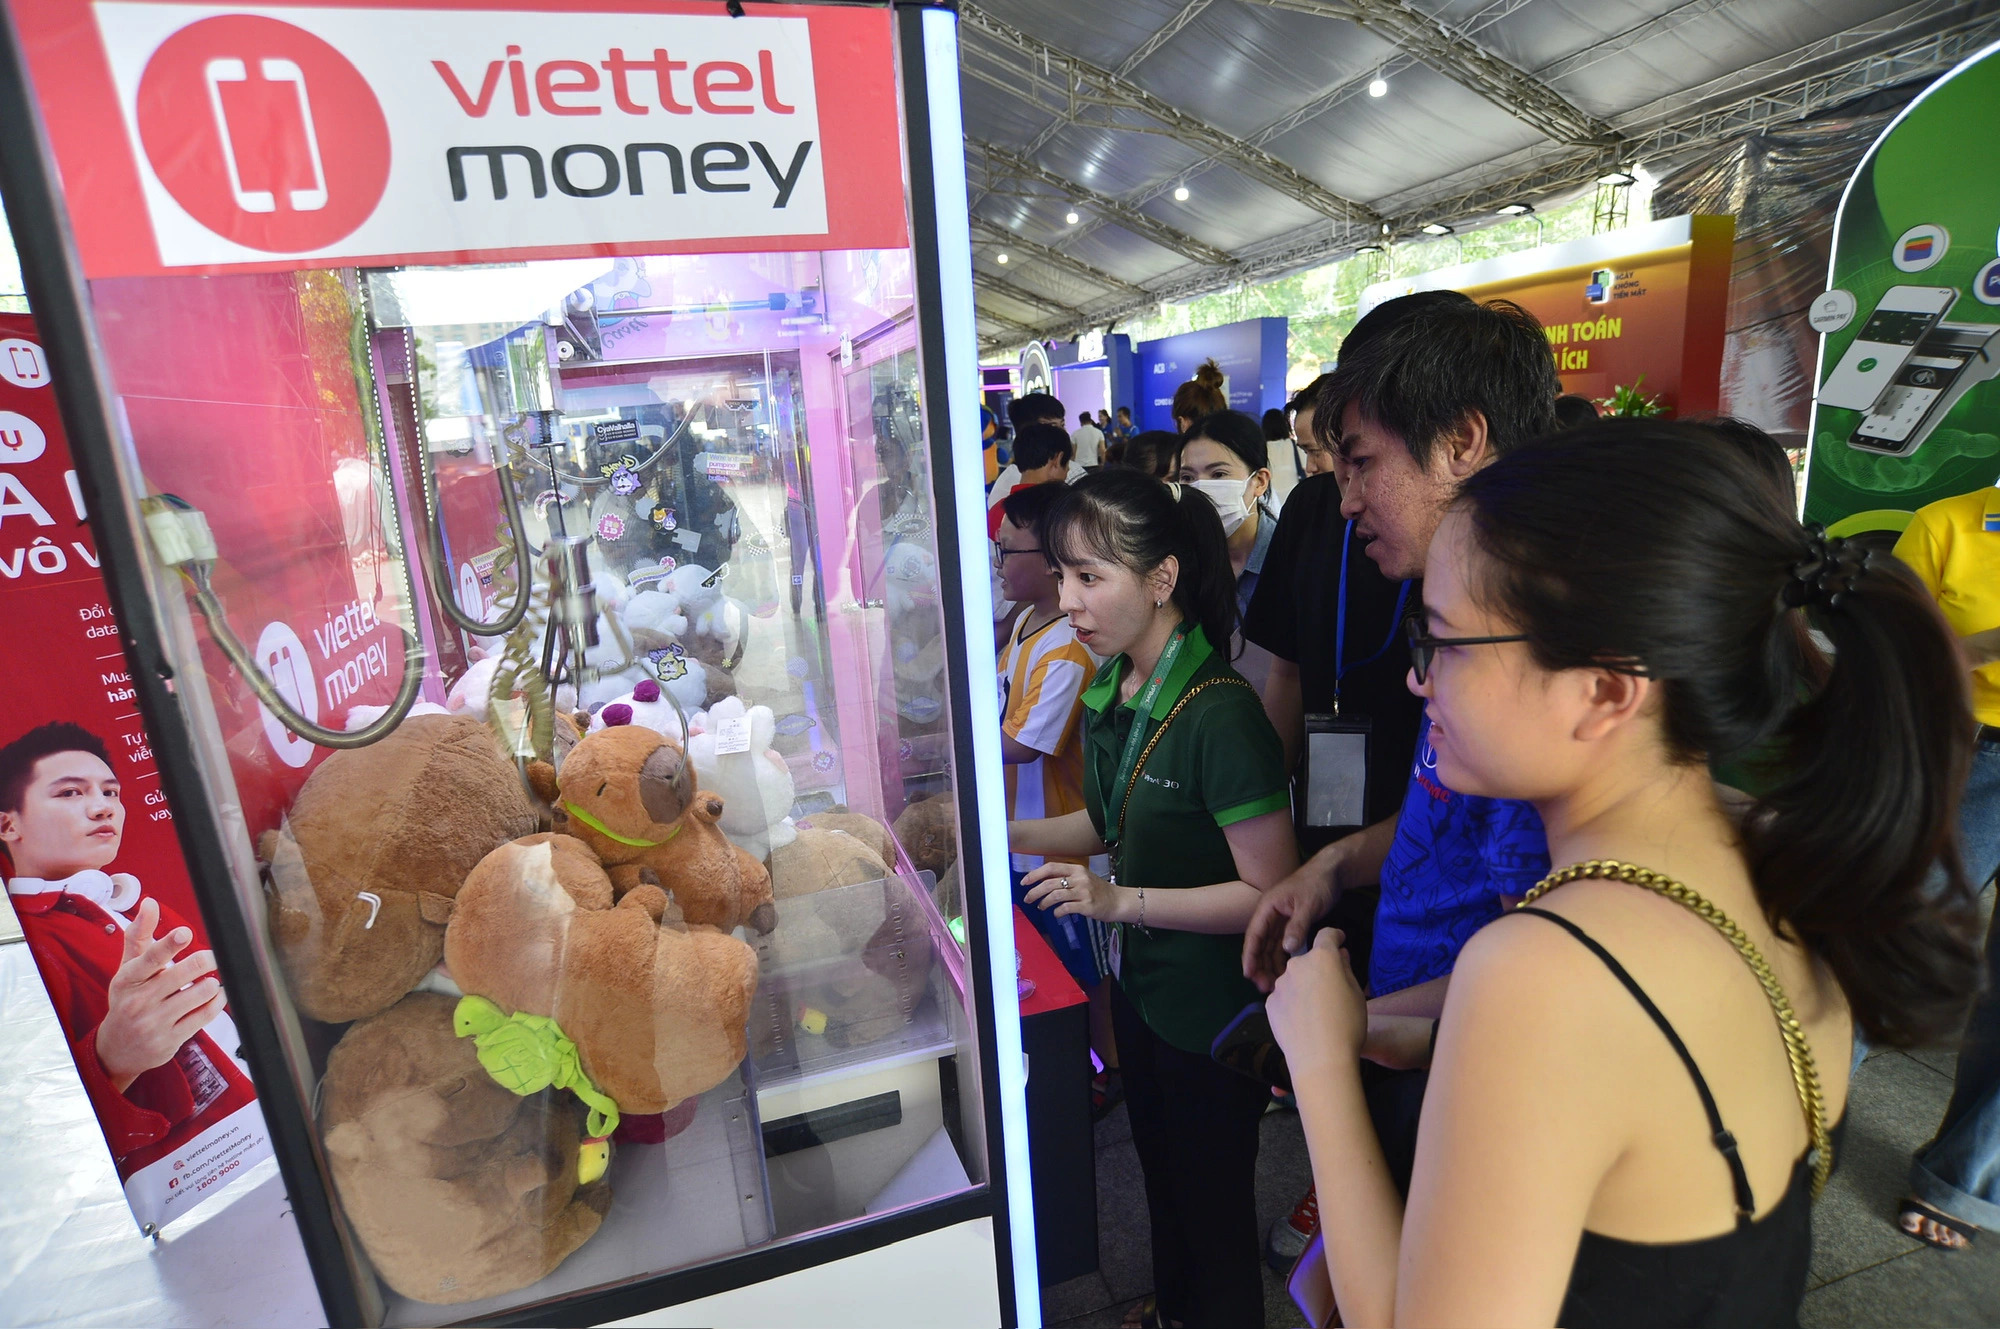 Military-run e-wallet Viettel Money hosts interactive games and offers countless gifts to visitors. Photo: Quang Dinh / Tuoi Tre